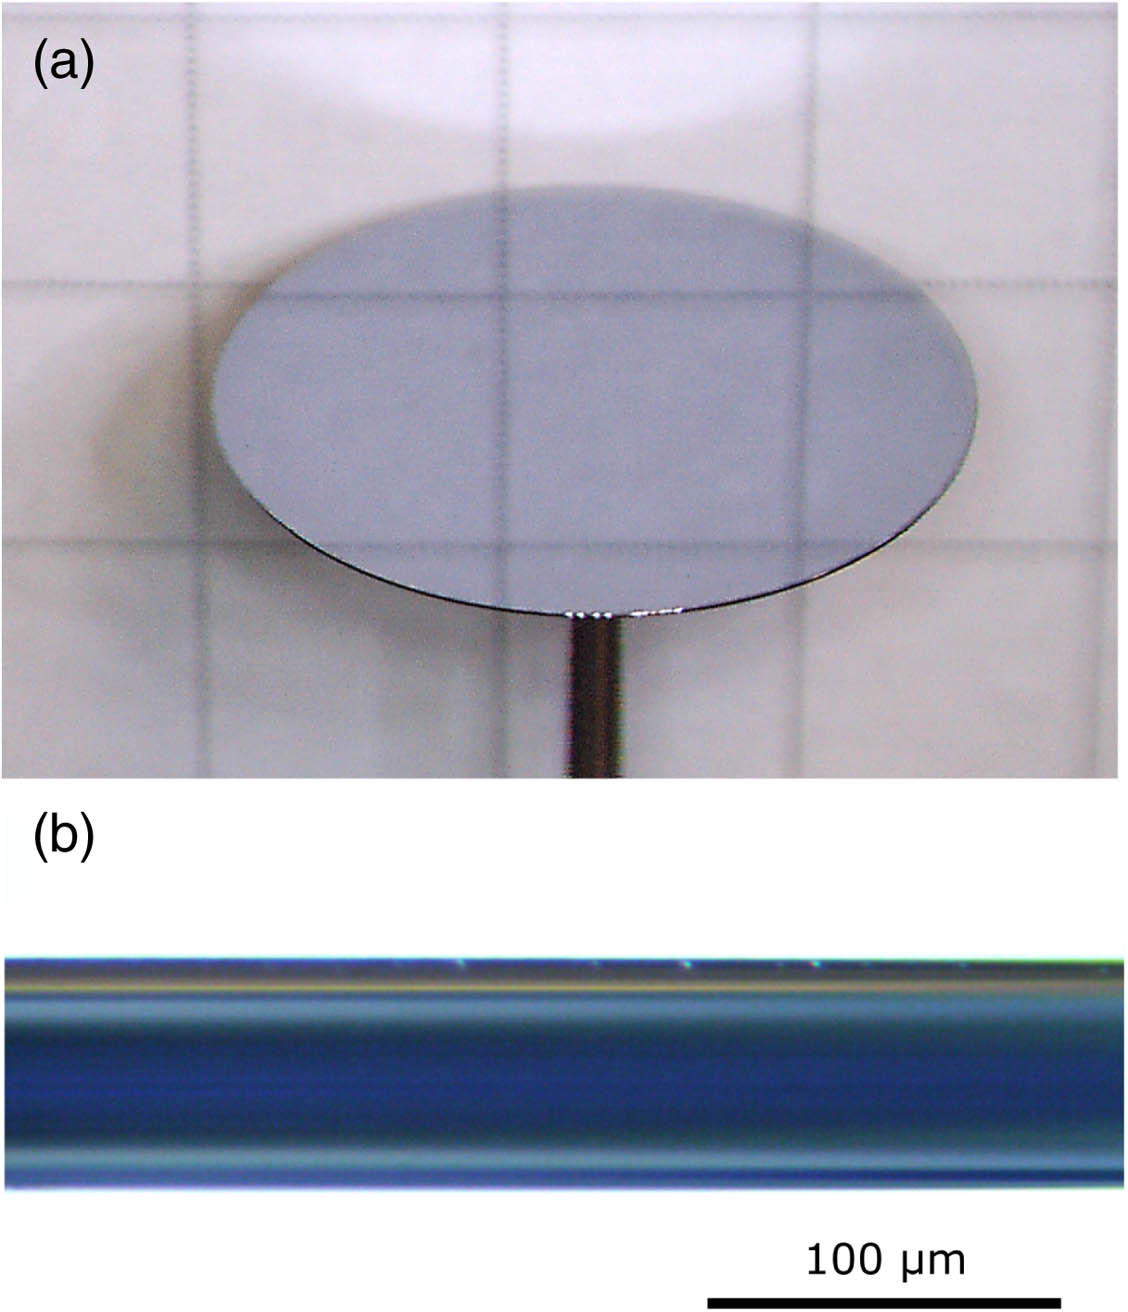 Microscope images of (a) the top and (b) the rim of the 12 mm diameter disc with (66±1) μm thickness. The thin disc resonator is mounted on a 1 mm diameter metallic rod. The different colors in the photograph are due to reflections from various light sources.